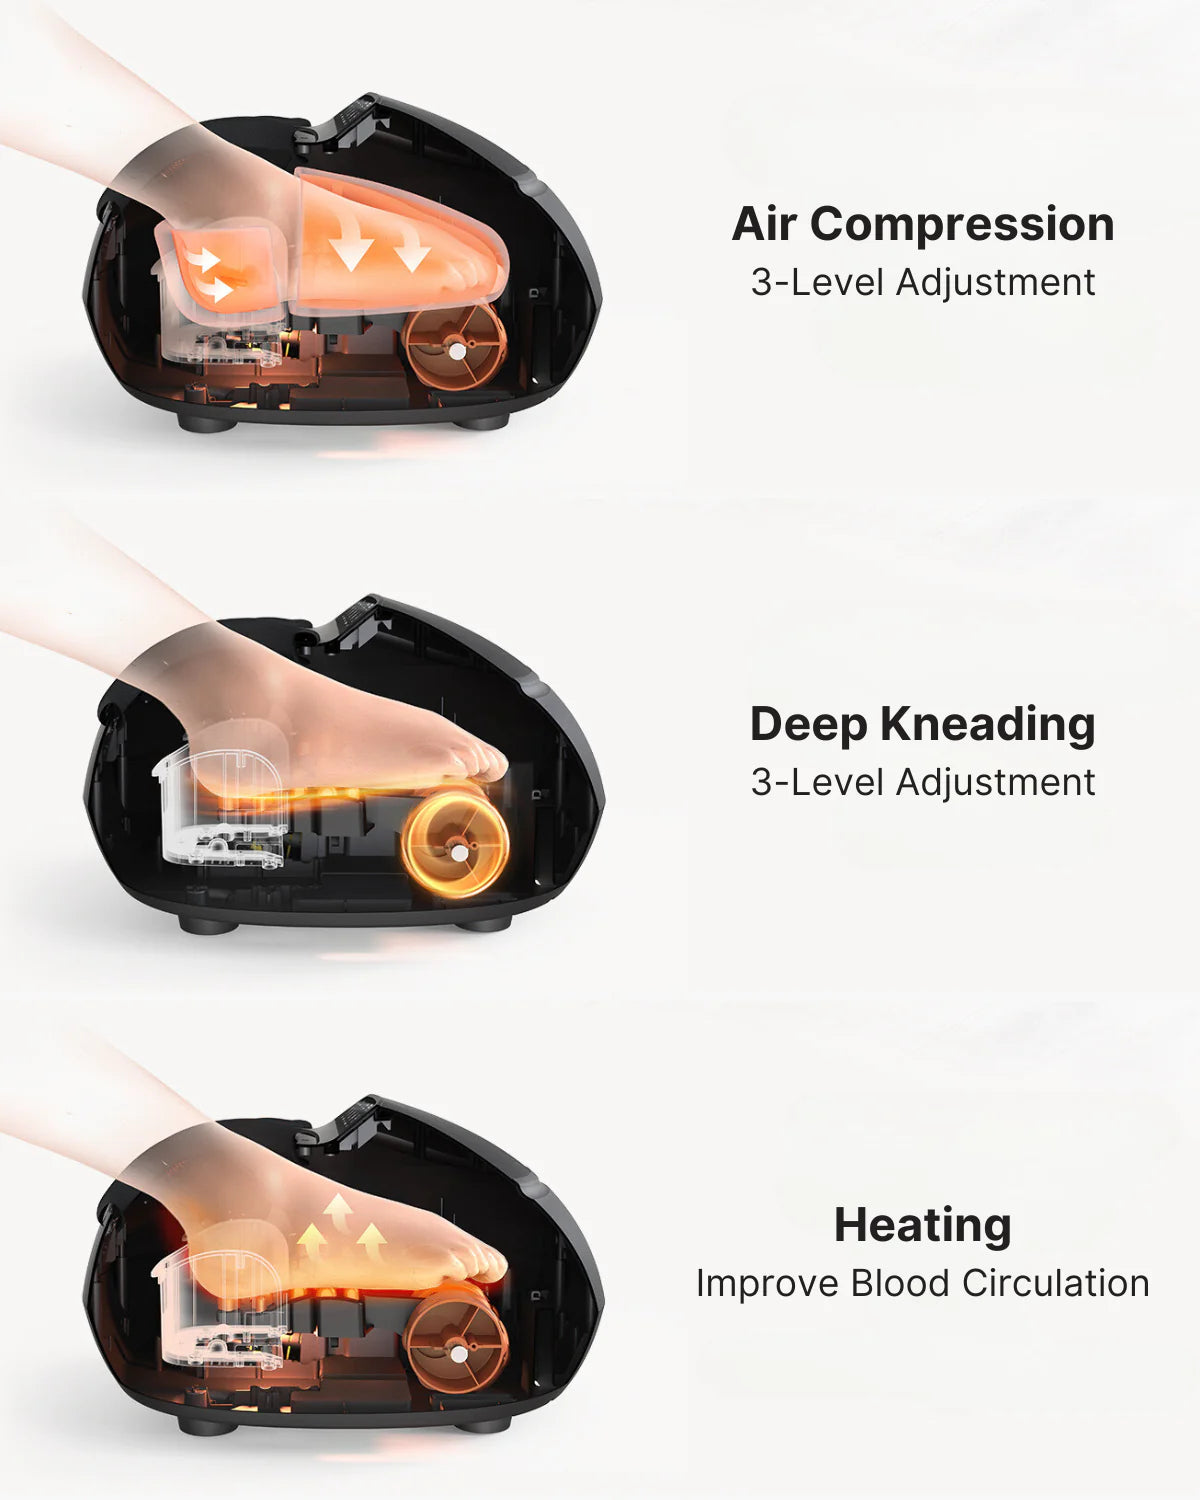 Three sections of a black Shiatsu Foot Massager Premium by Renpho EU with transparent side views showing internal mechanisms. Top section highlights air compression technology, middle shows deep kneading rollers, and bottom indicates heating elements to aid blood circulation.